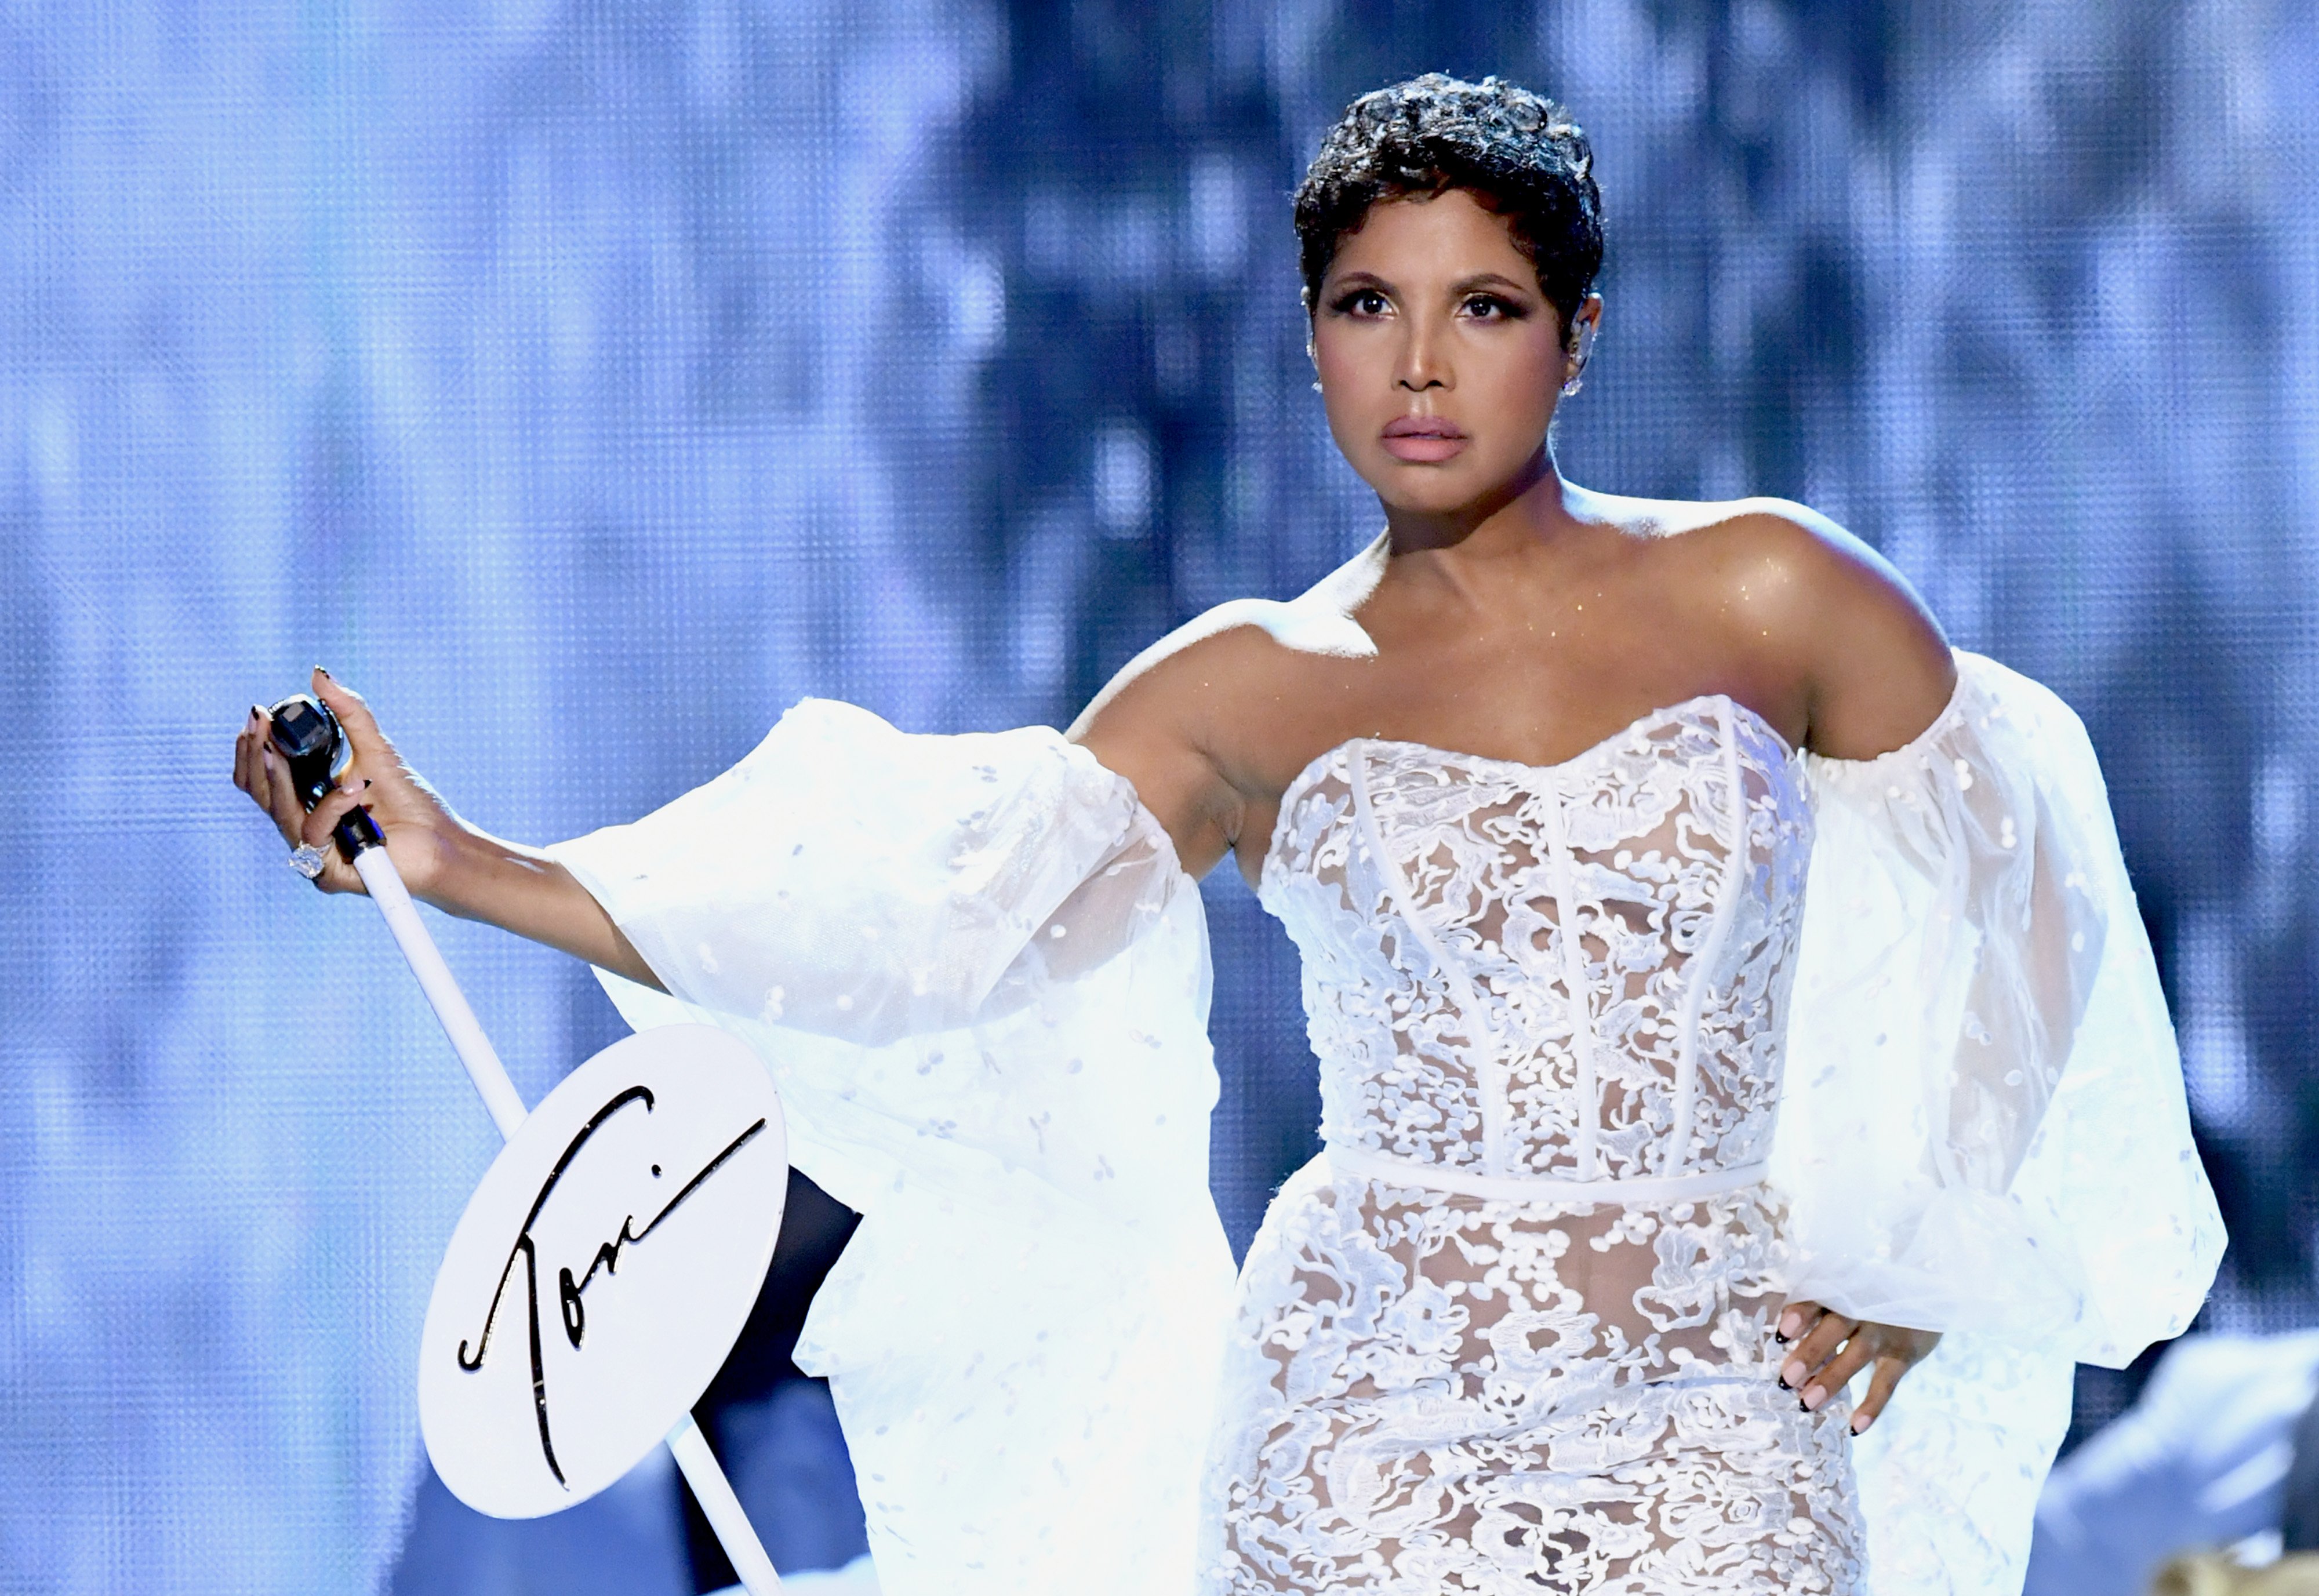 Toni Braxton performs at the 2019 American Music Awards at Microsoft Theater on November 24, 2019 in Los Angeles, California.| Source: Getty Images